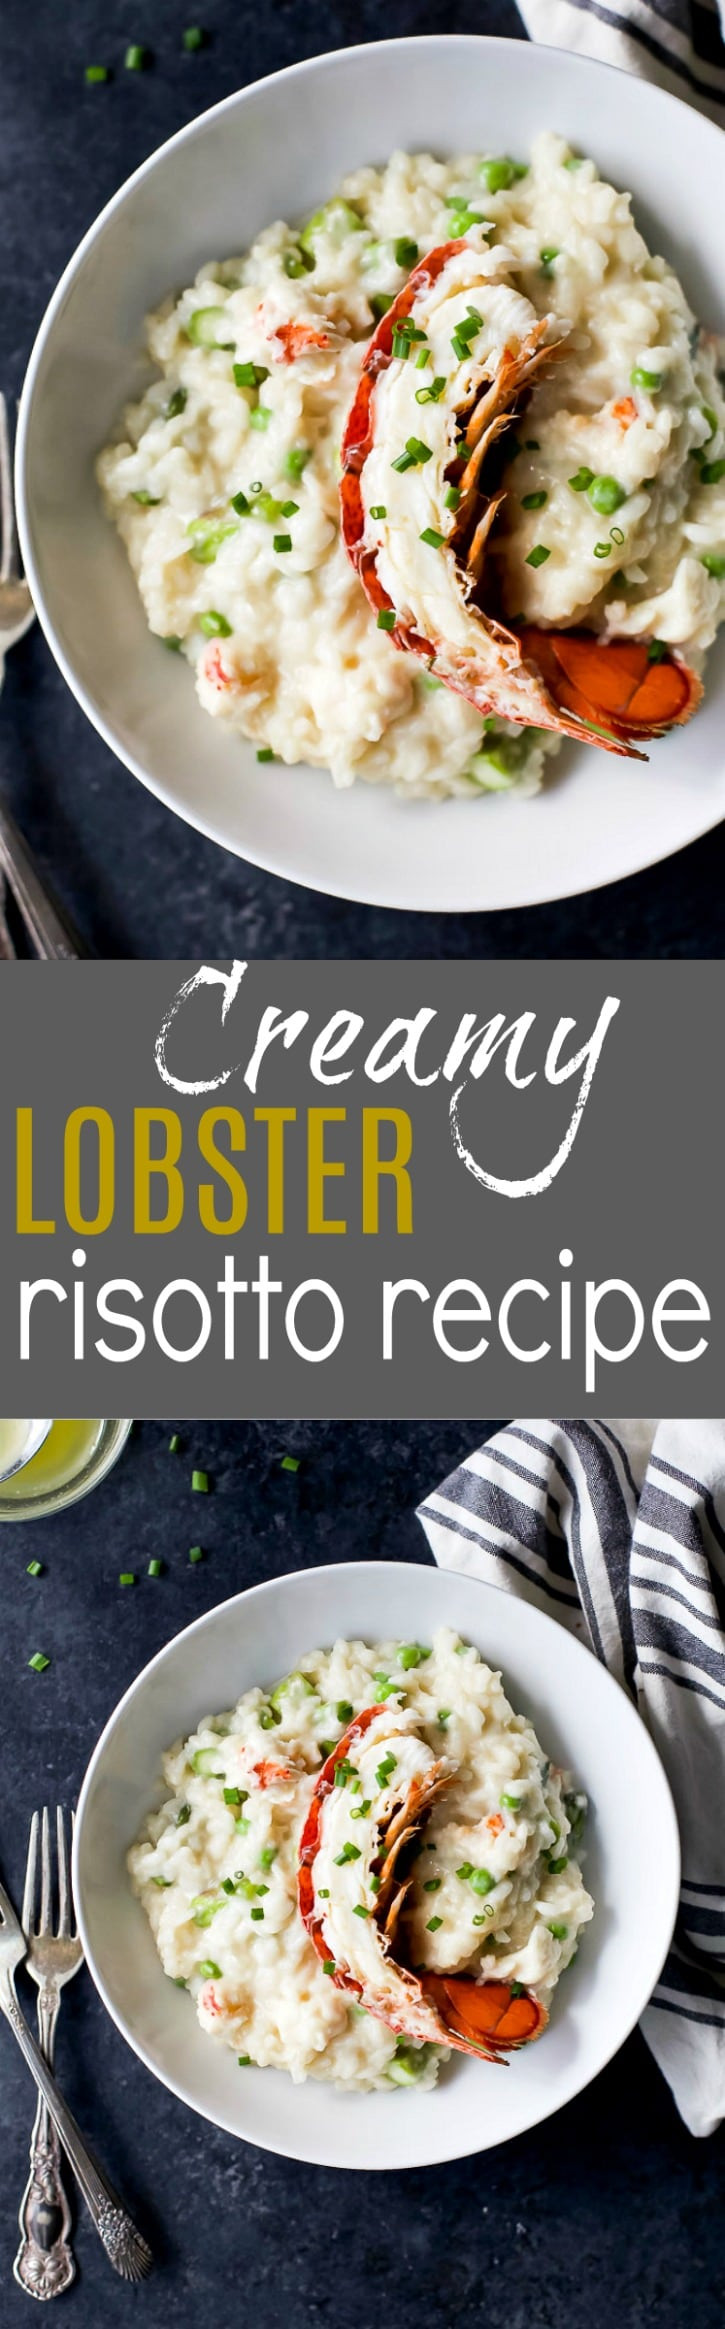 Healthy Risotto Recipes
 Healthy Lobster Risotto Recipes